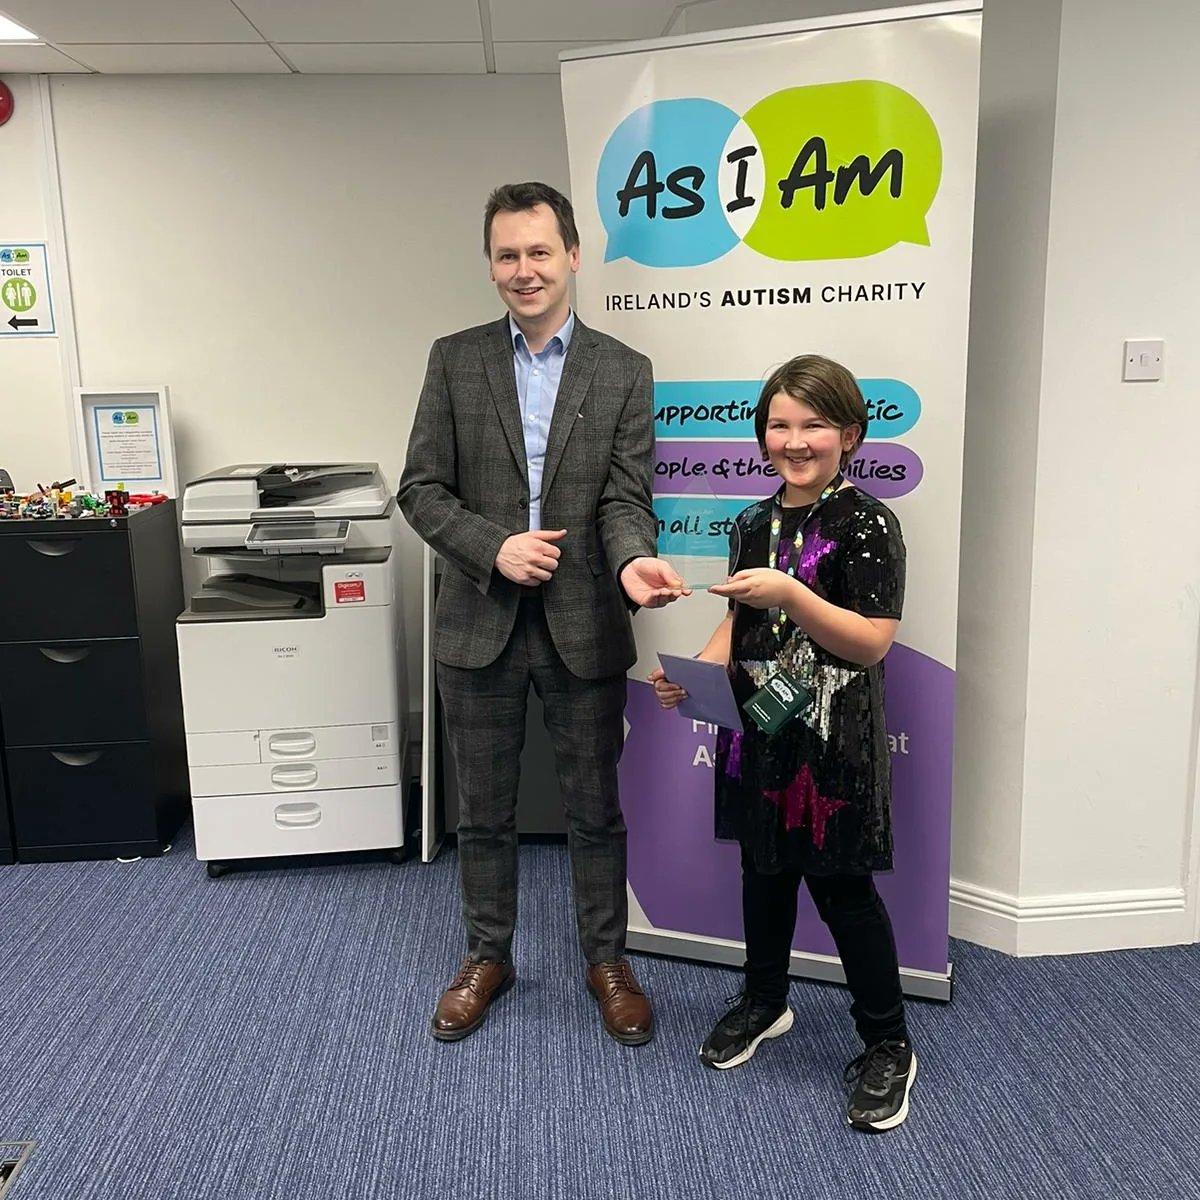 We were delighted to recognise Abigail for her incredible act of bravery. Last November after the awful stabbings in Dublin, Abigail ran to the Rotunda Hospital to raise the alarm and seek help. (1/3)